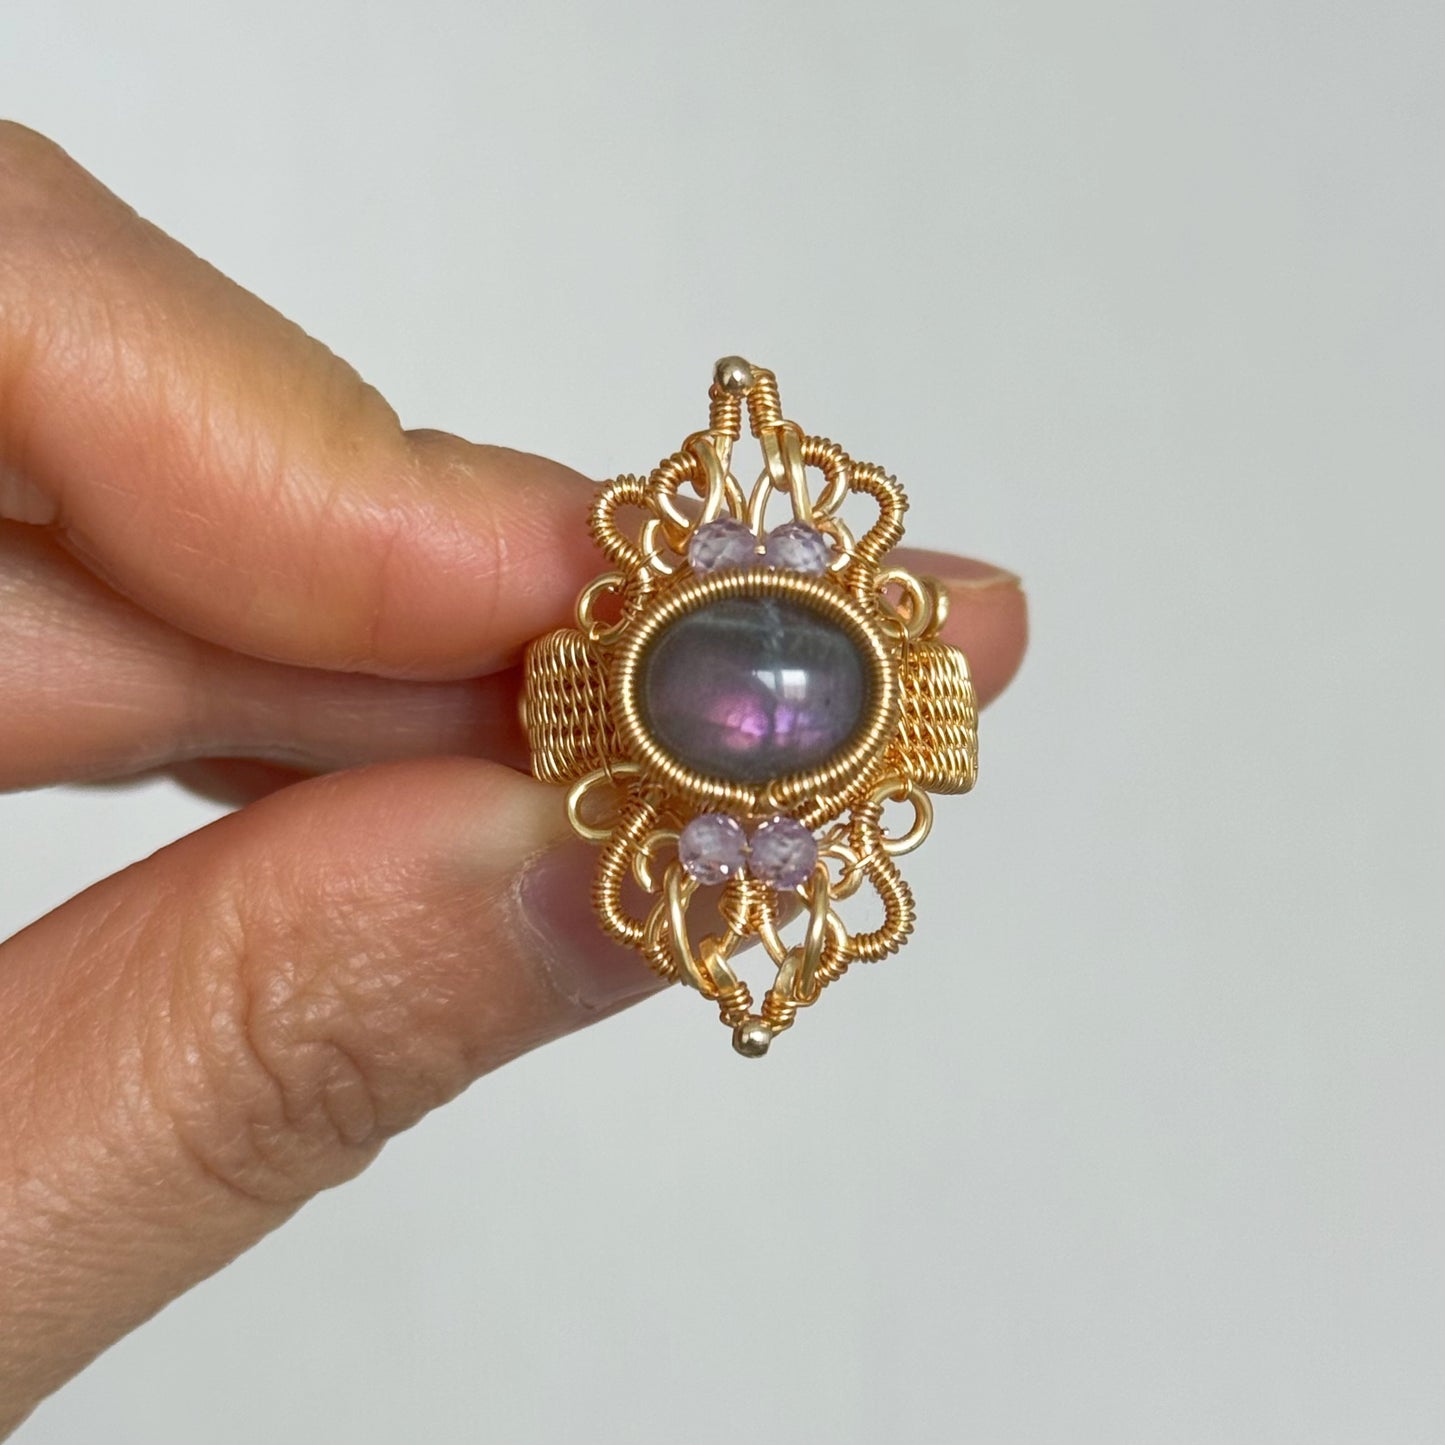 Handmade Purple Labradorite Ring (Open End Adjustment) - Wire Wrapped Jewelry